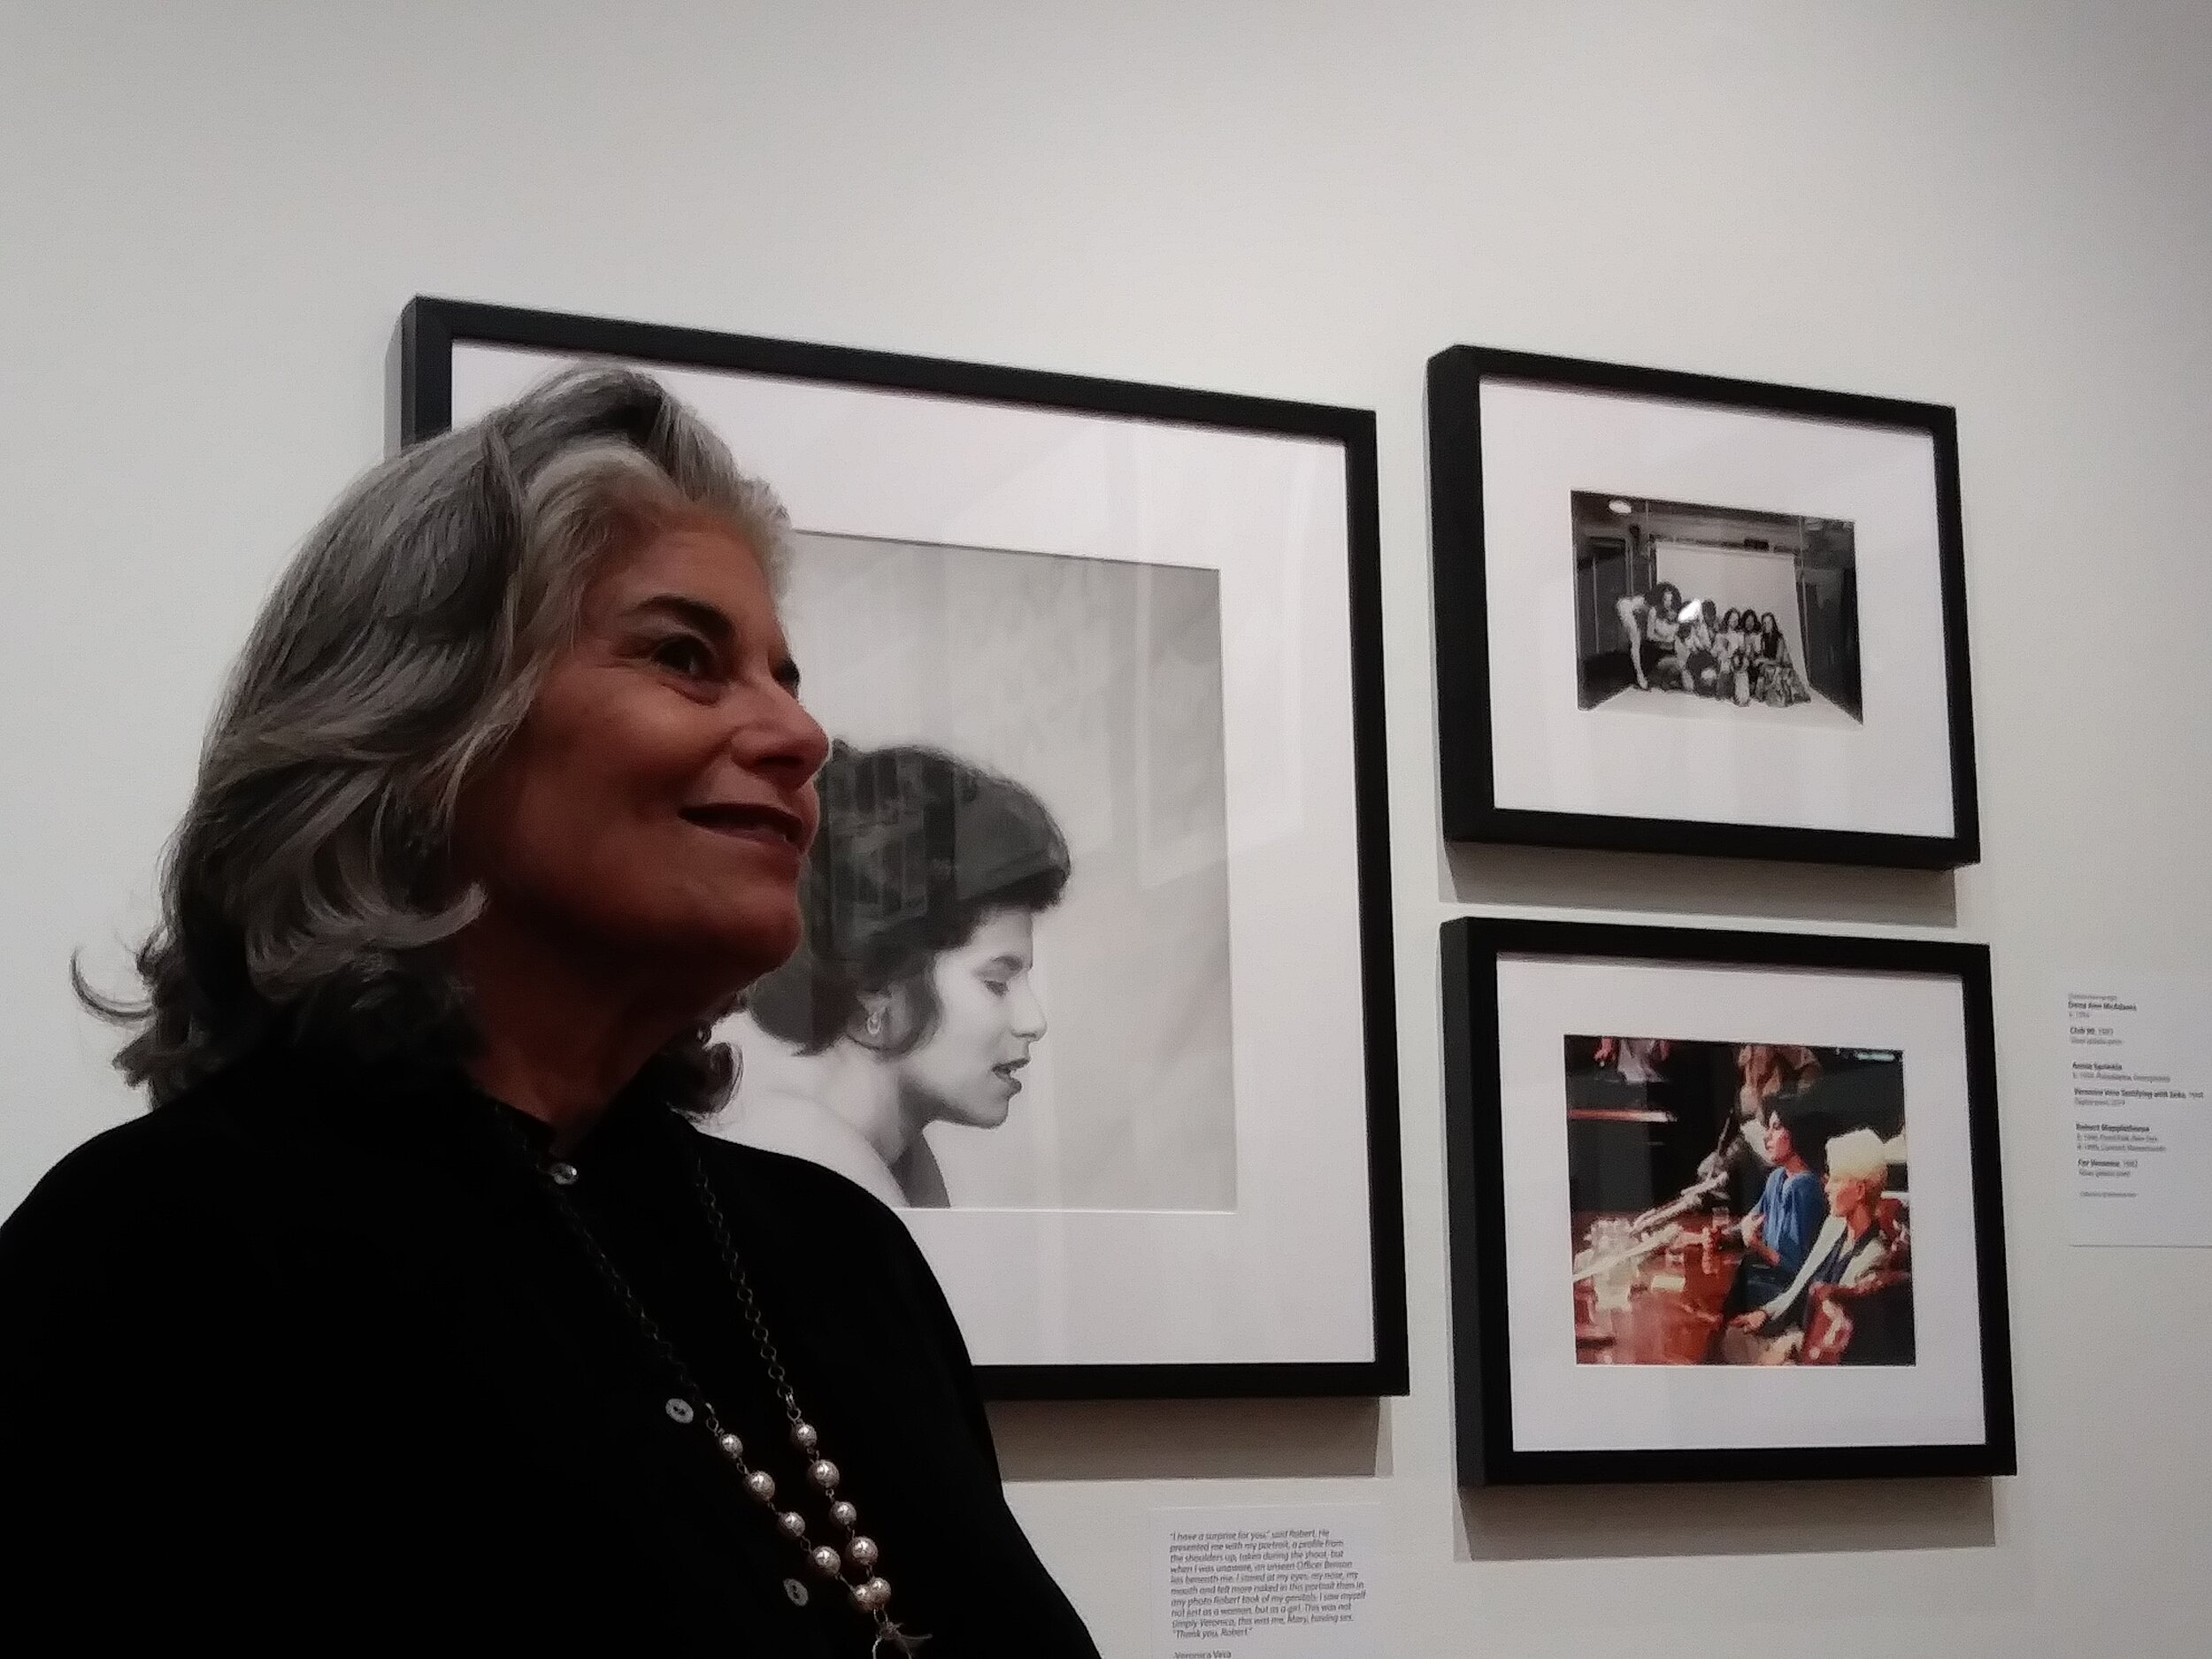 Taken at the Leslie Lohman exhibition, “On Our Backs: The Revolutionary Art of Queer Sex Worker Activists." Photo by Jenna Jay, 9/2019.